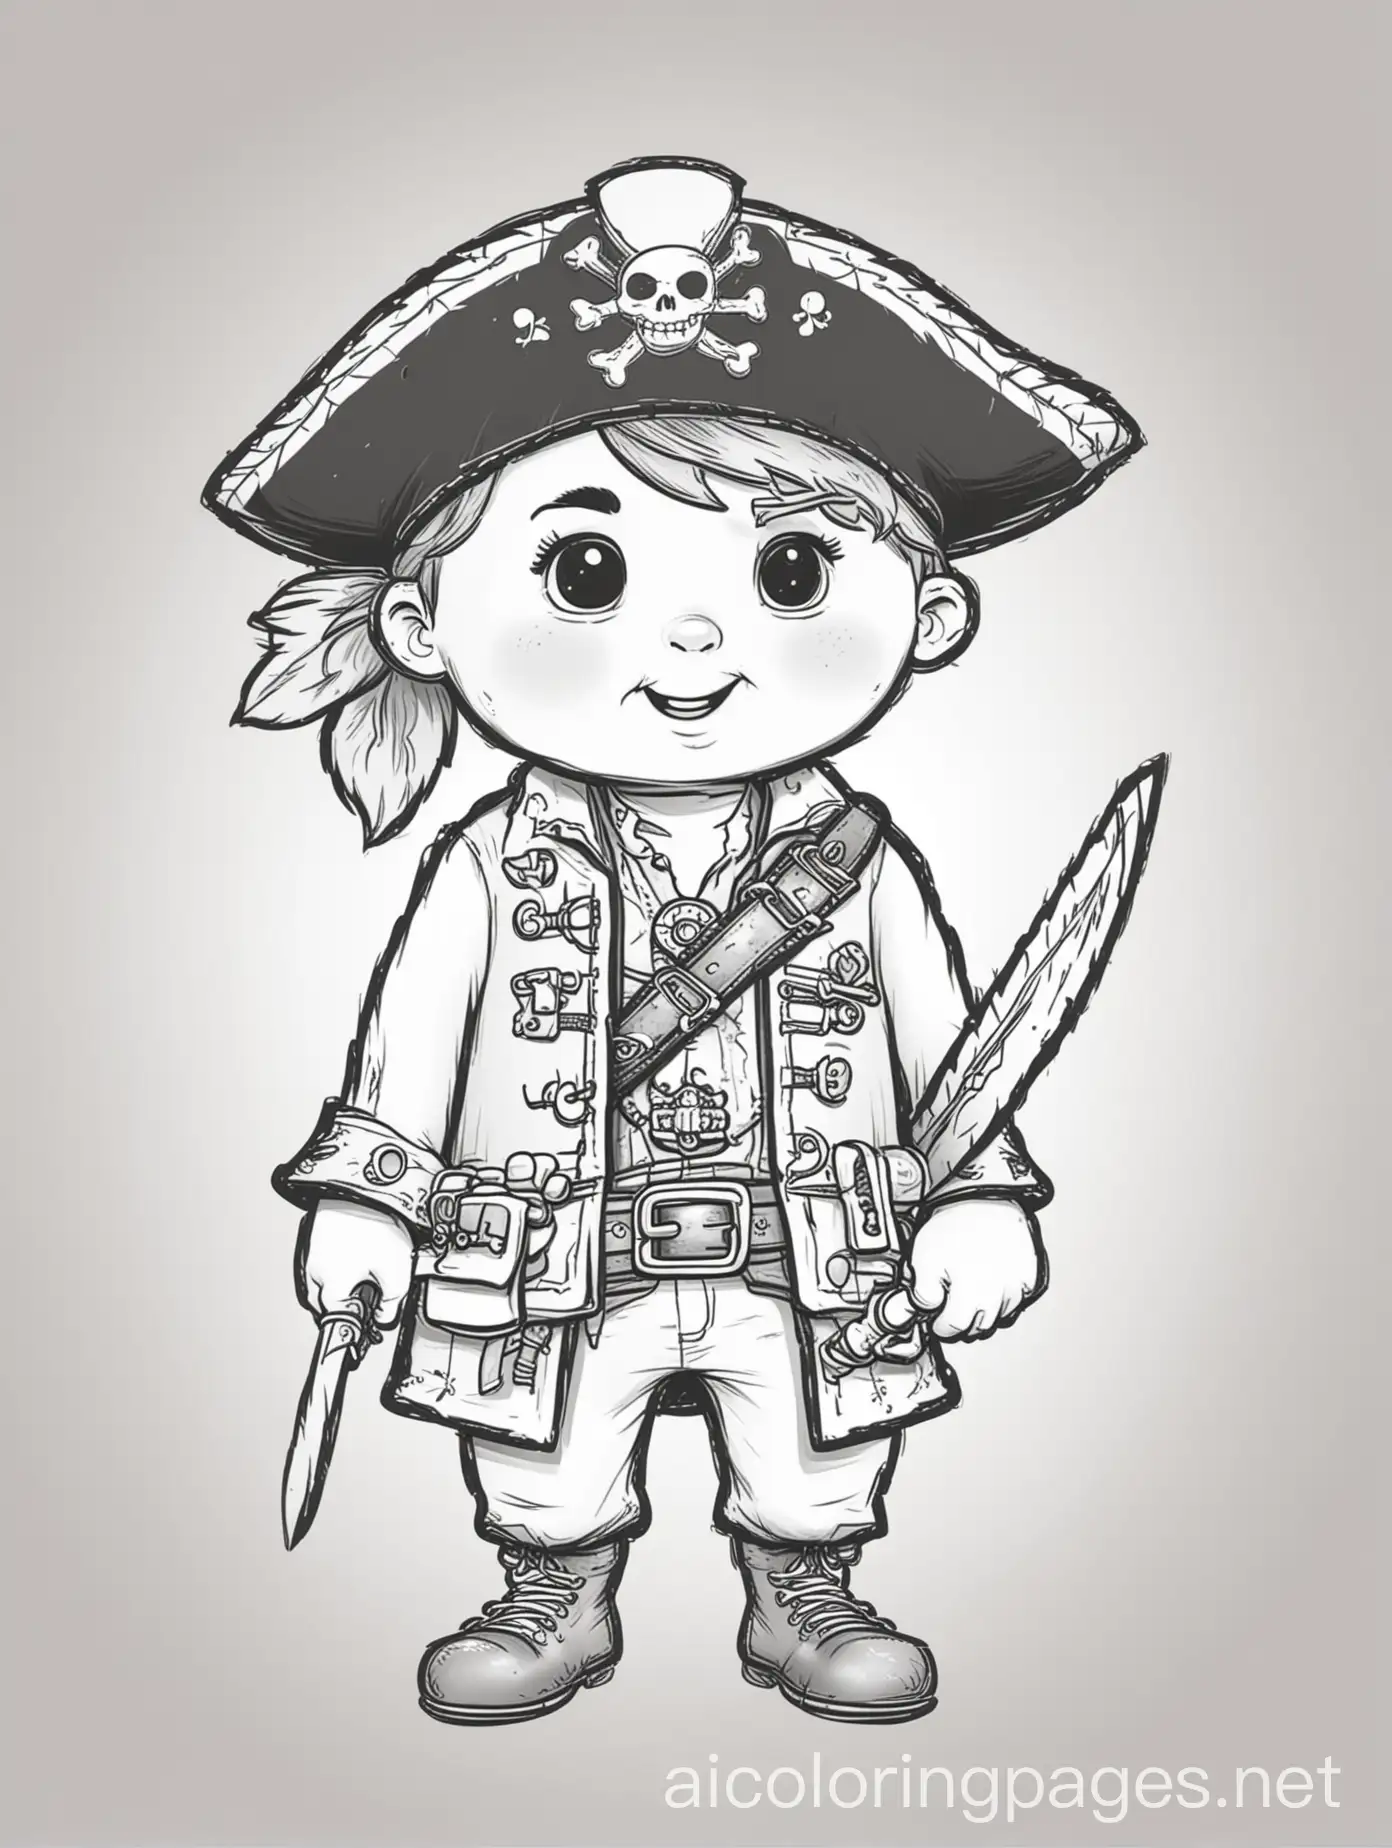 pirate for little kid's coloring book, extremely simple shapes, thick outlines, fun, cute, adorable, simplistic, for a toddler's coloring book , Coloring Page, black and white, line art, white background, Simplicity, Ample White Space